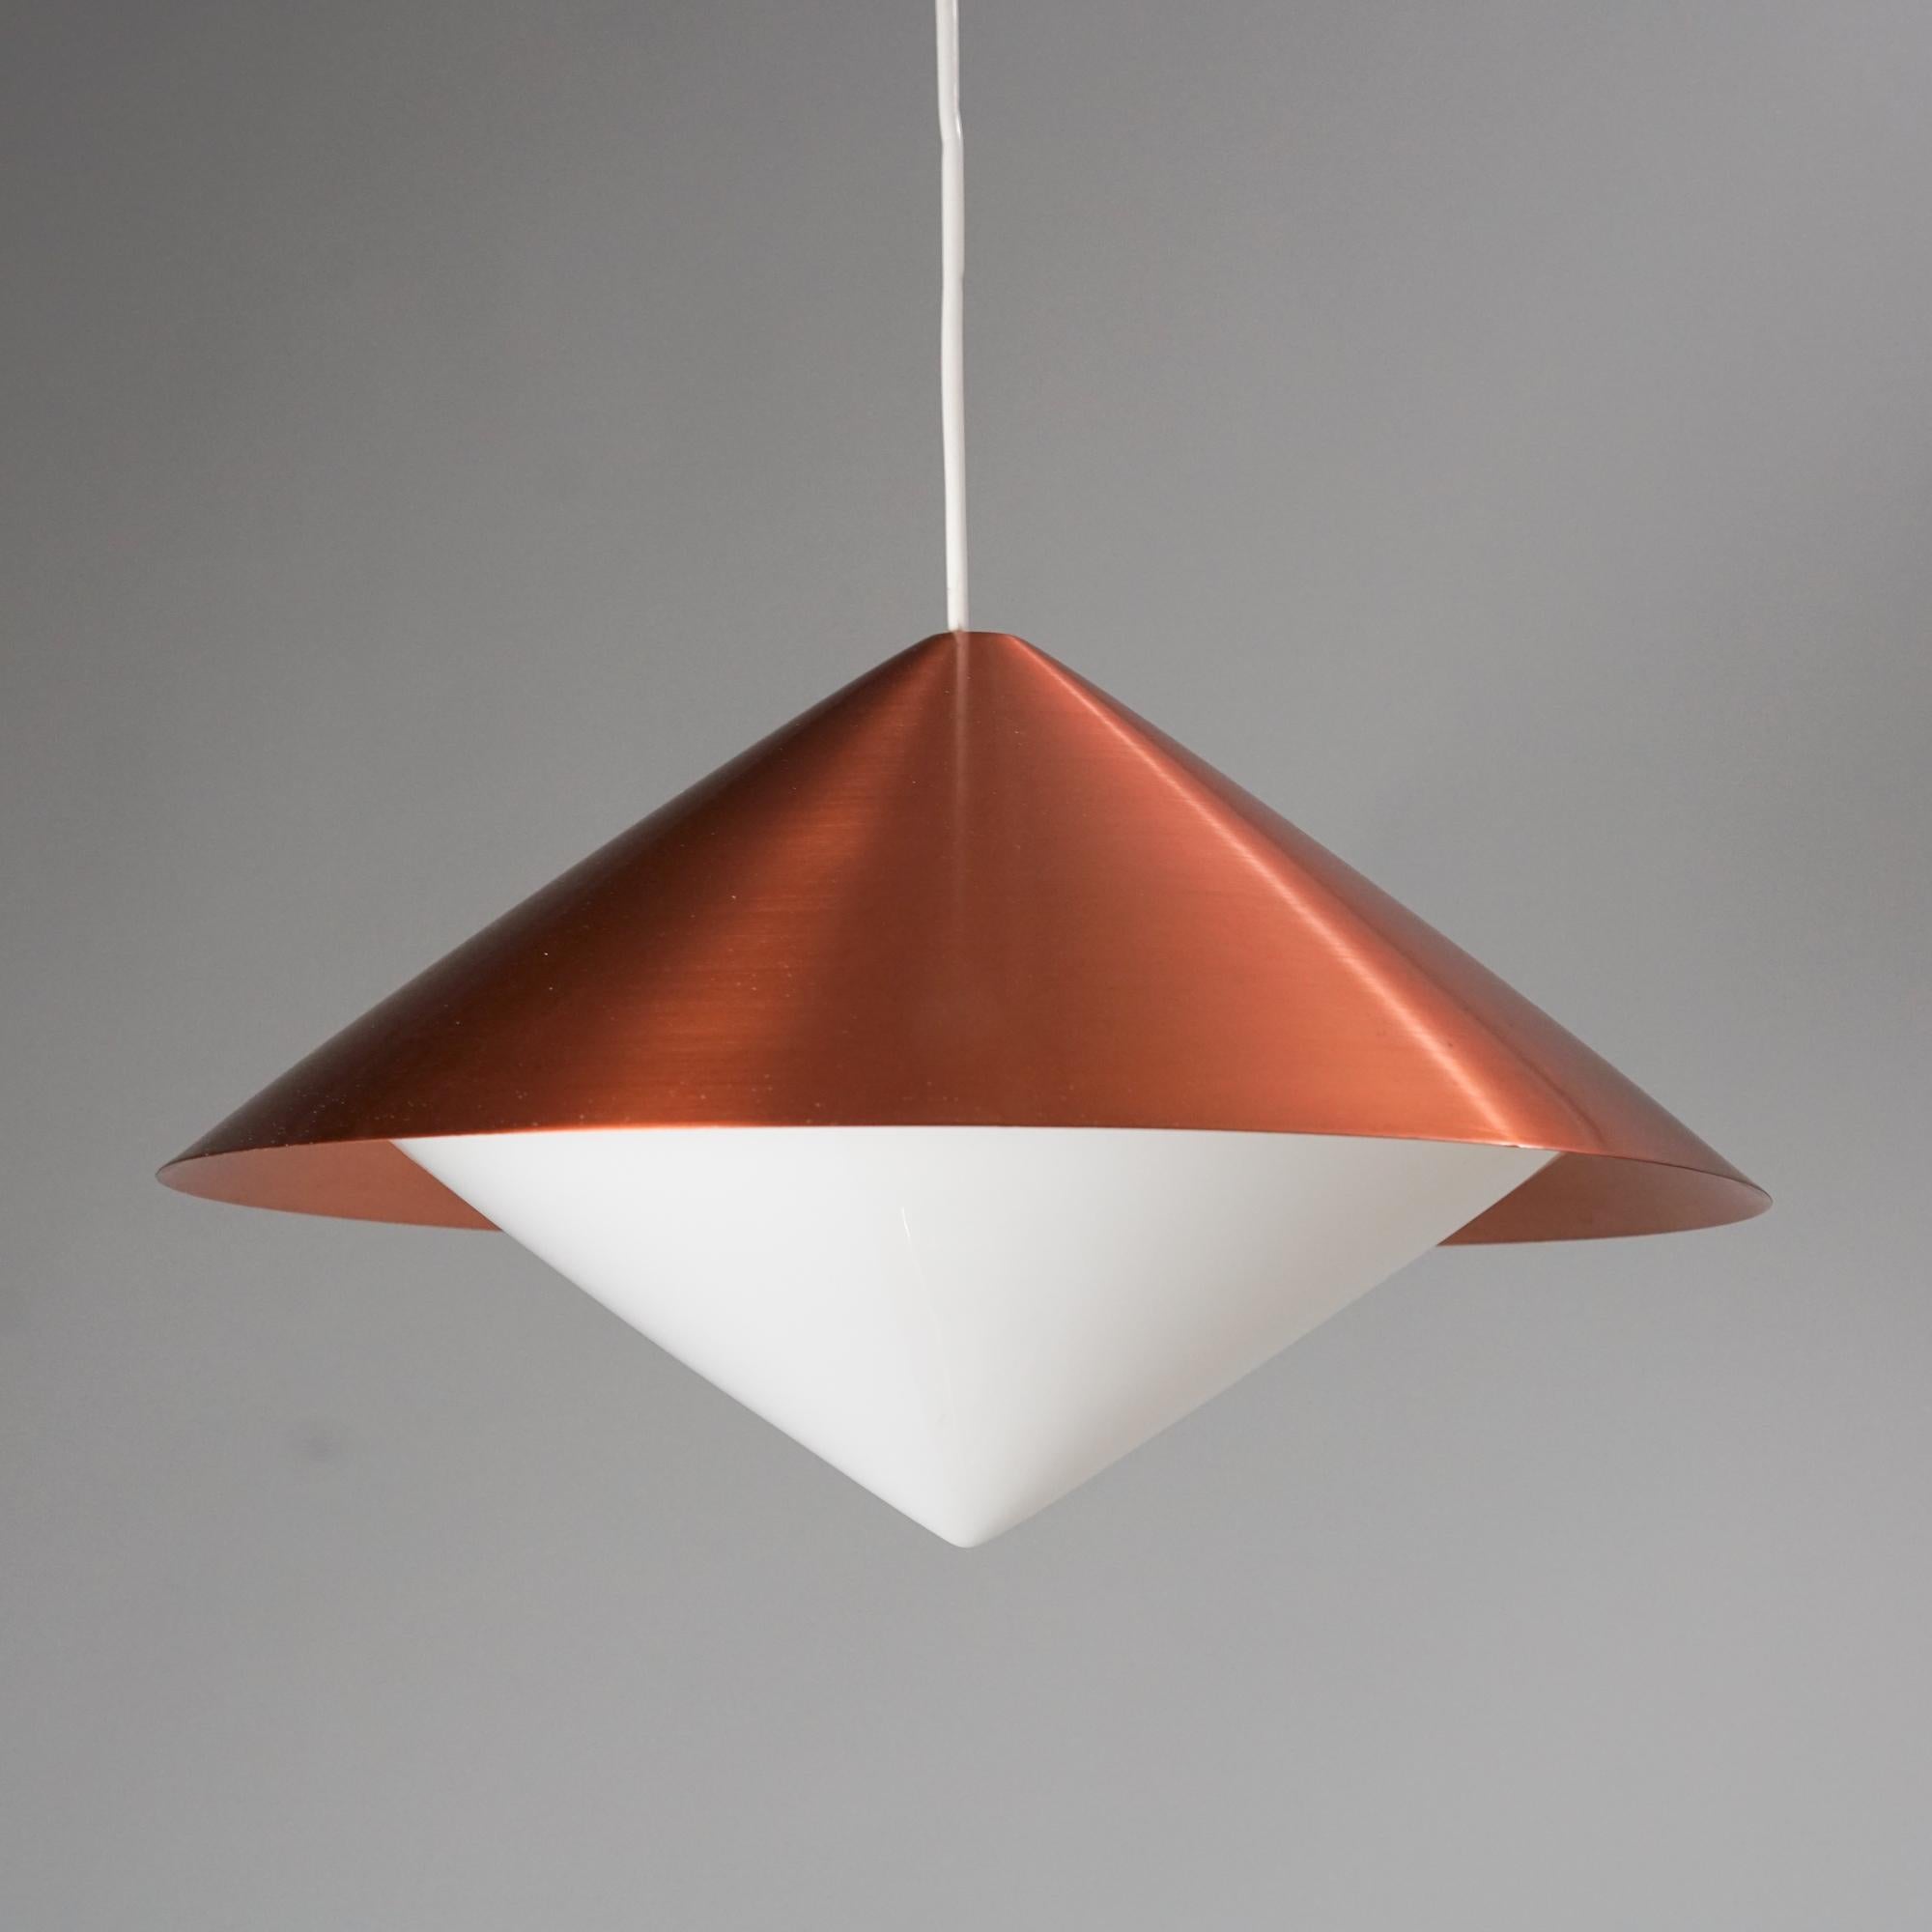 Copper pendant designed by Svea Winkler for Orno Oy, 1960/1970s. Copper and glass. Good vintage condition, minor patina consistent with age and use. Marked. 